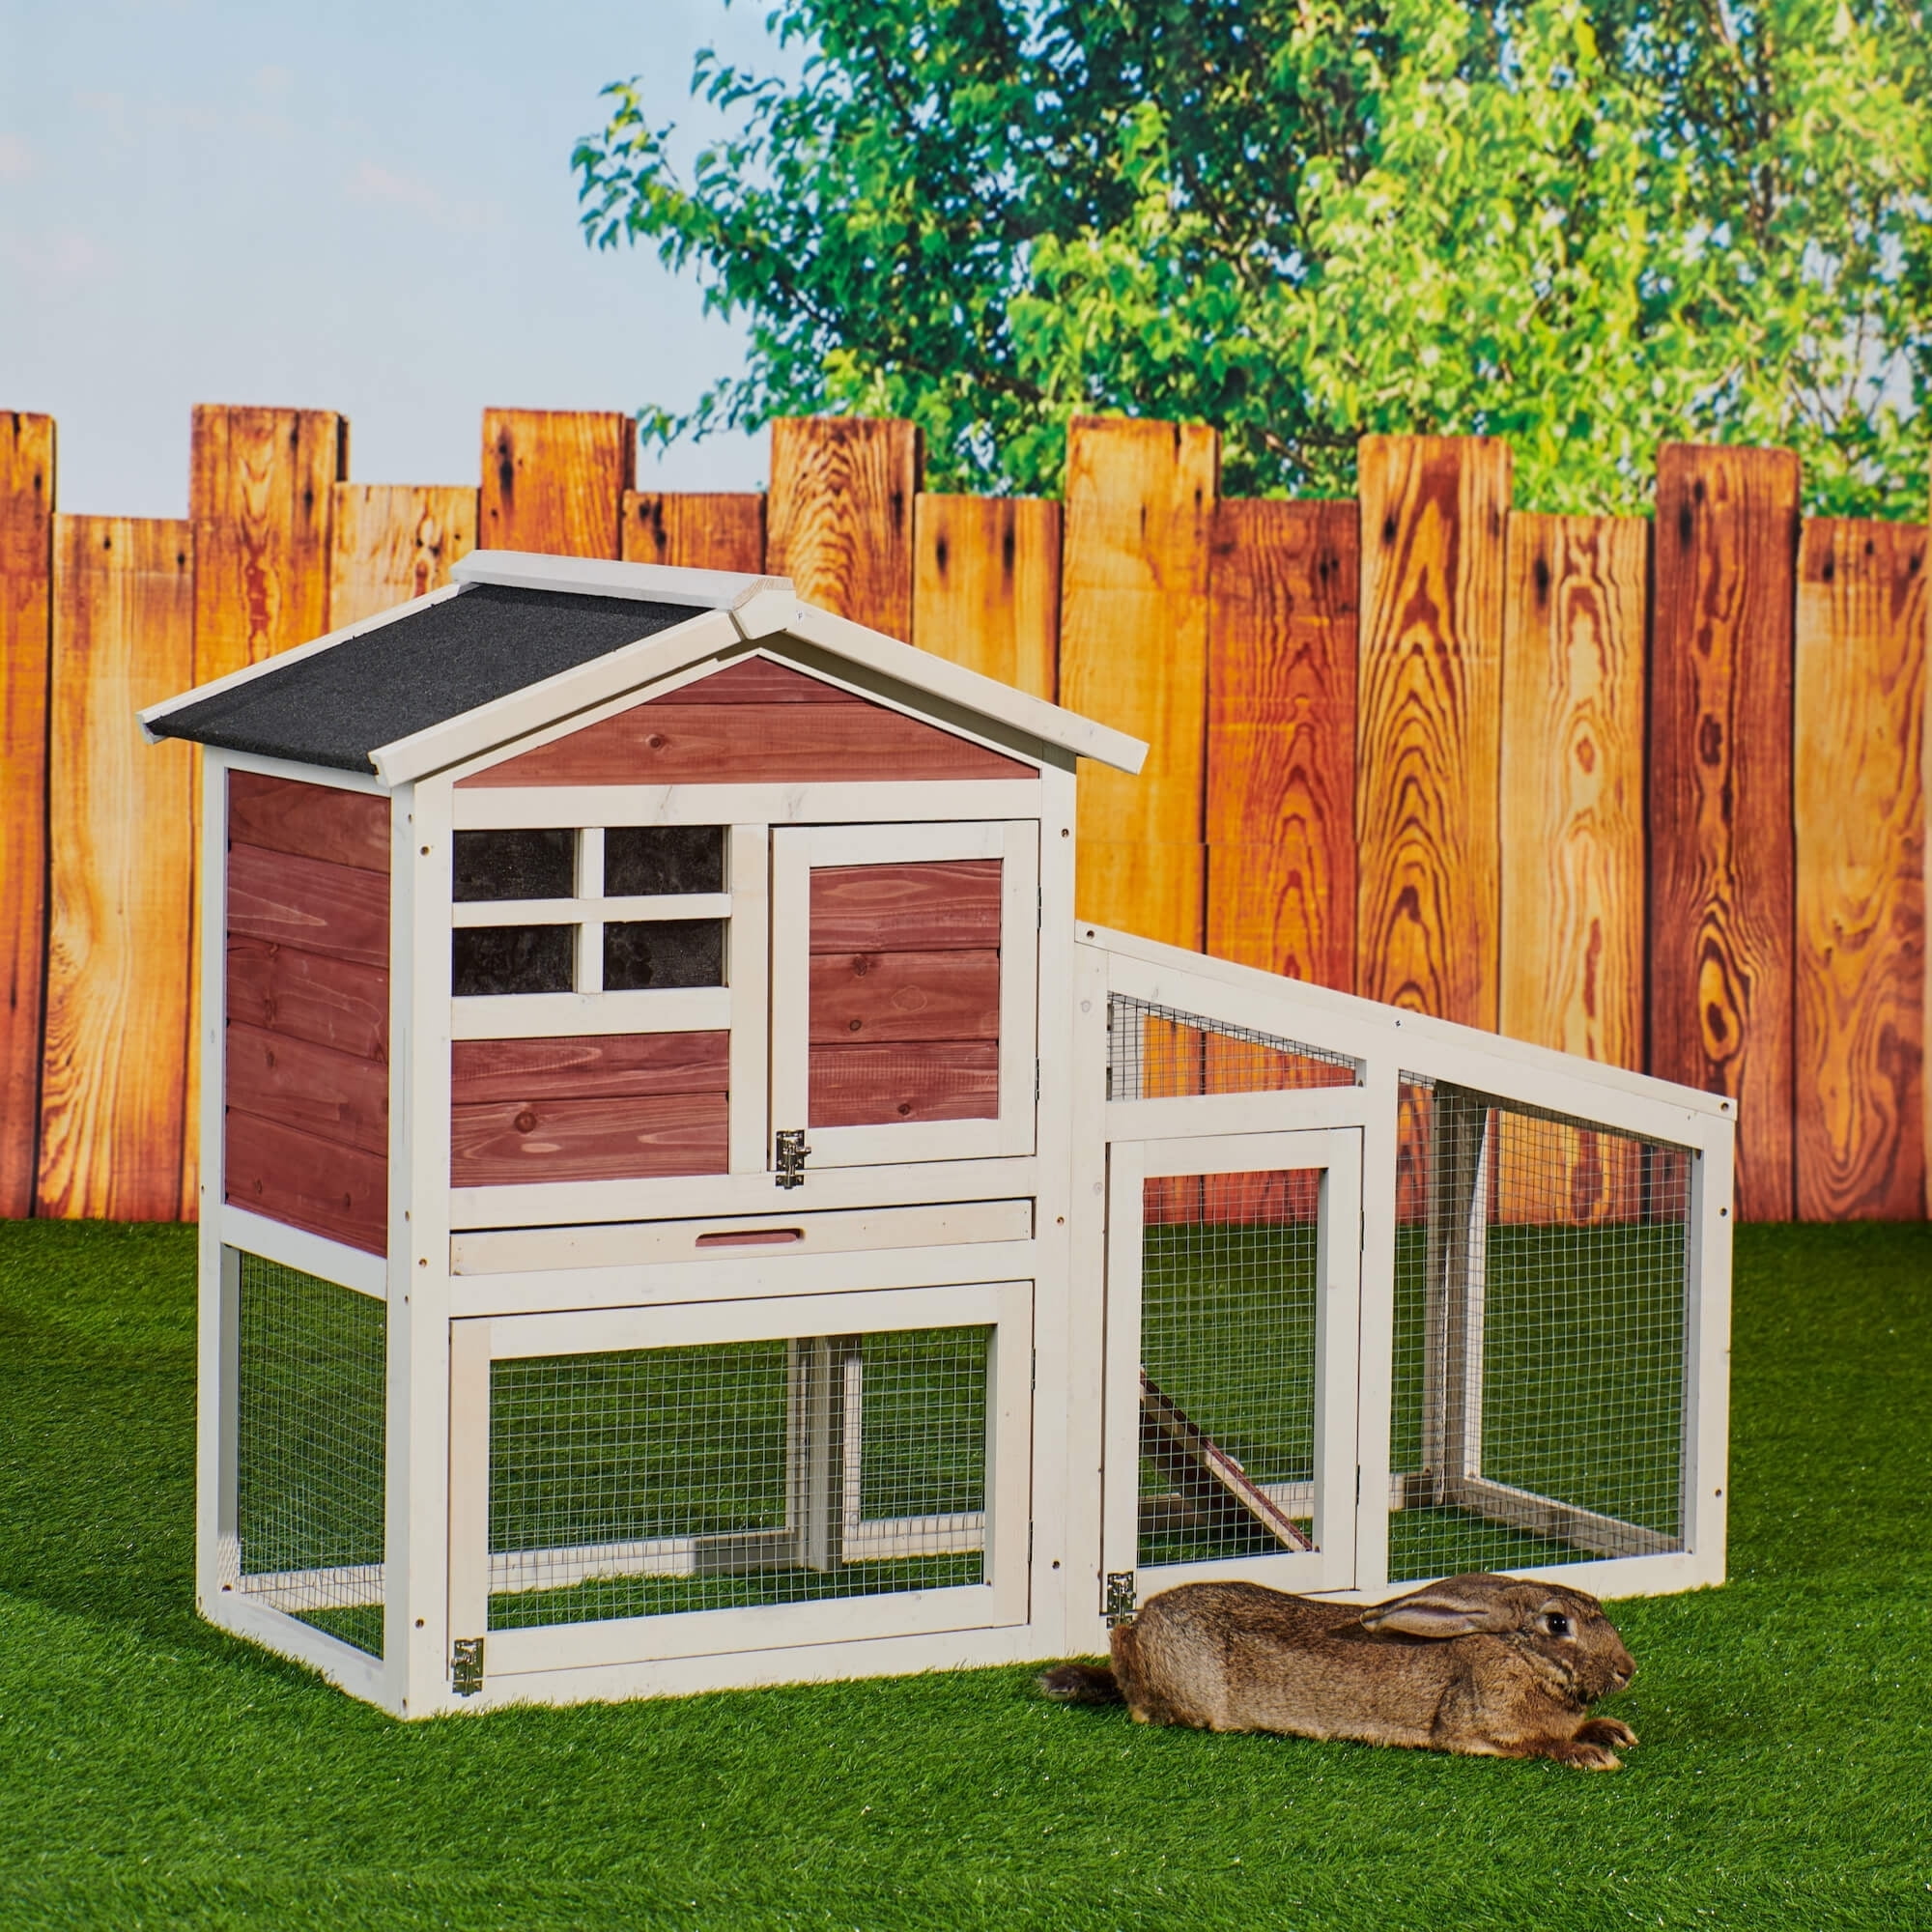 Bunny Hutch Chicken Coops Rabbit Hutch Indoor Outdoor Garden Backyard for Small Animals with Ramp and Removable Tray Rabbit Cage 